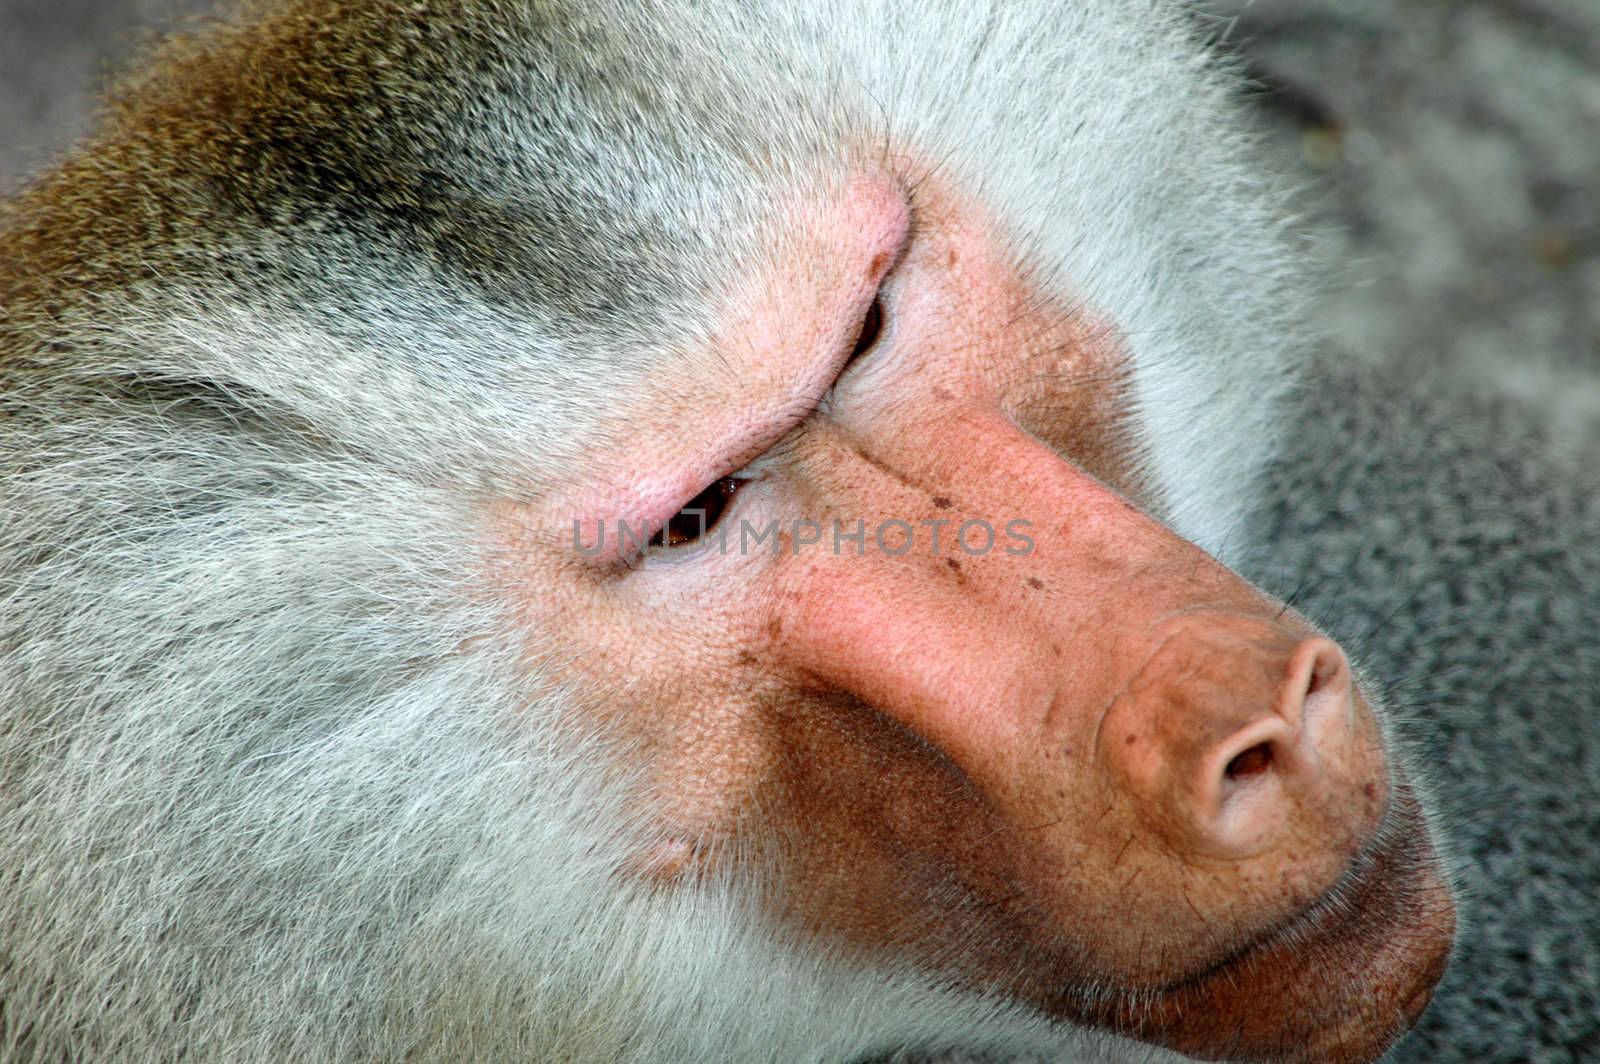 Face of a baboon. The baboon is looking very angry.